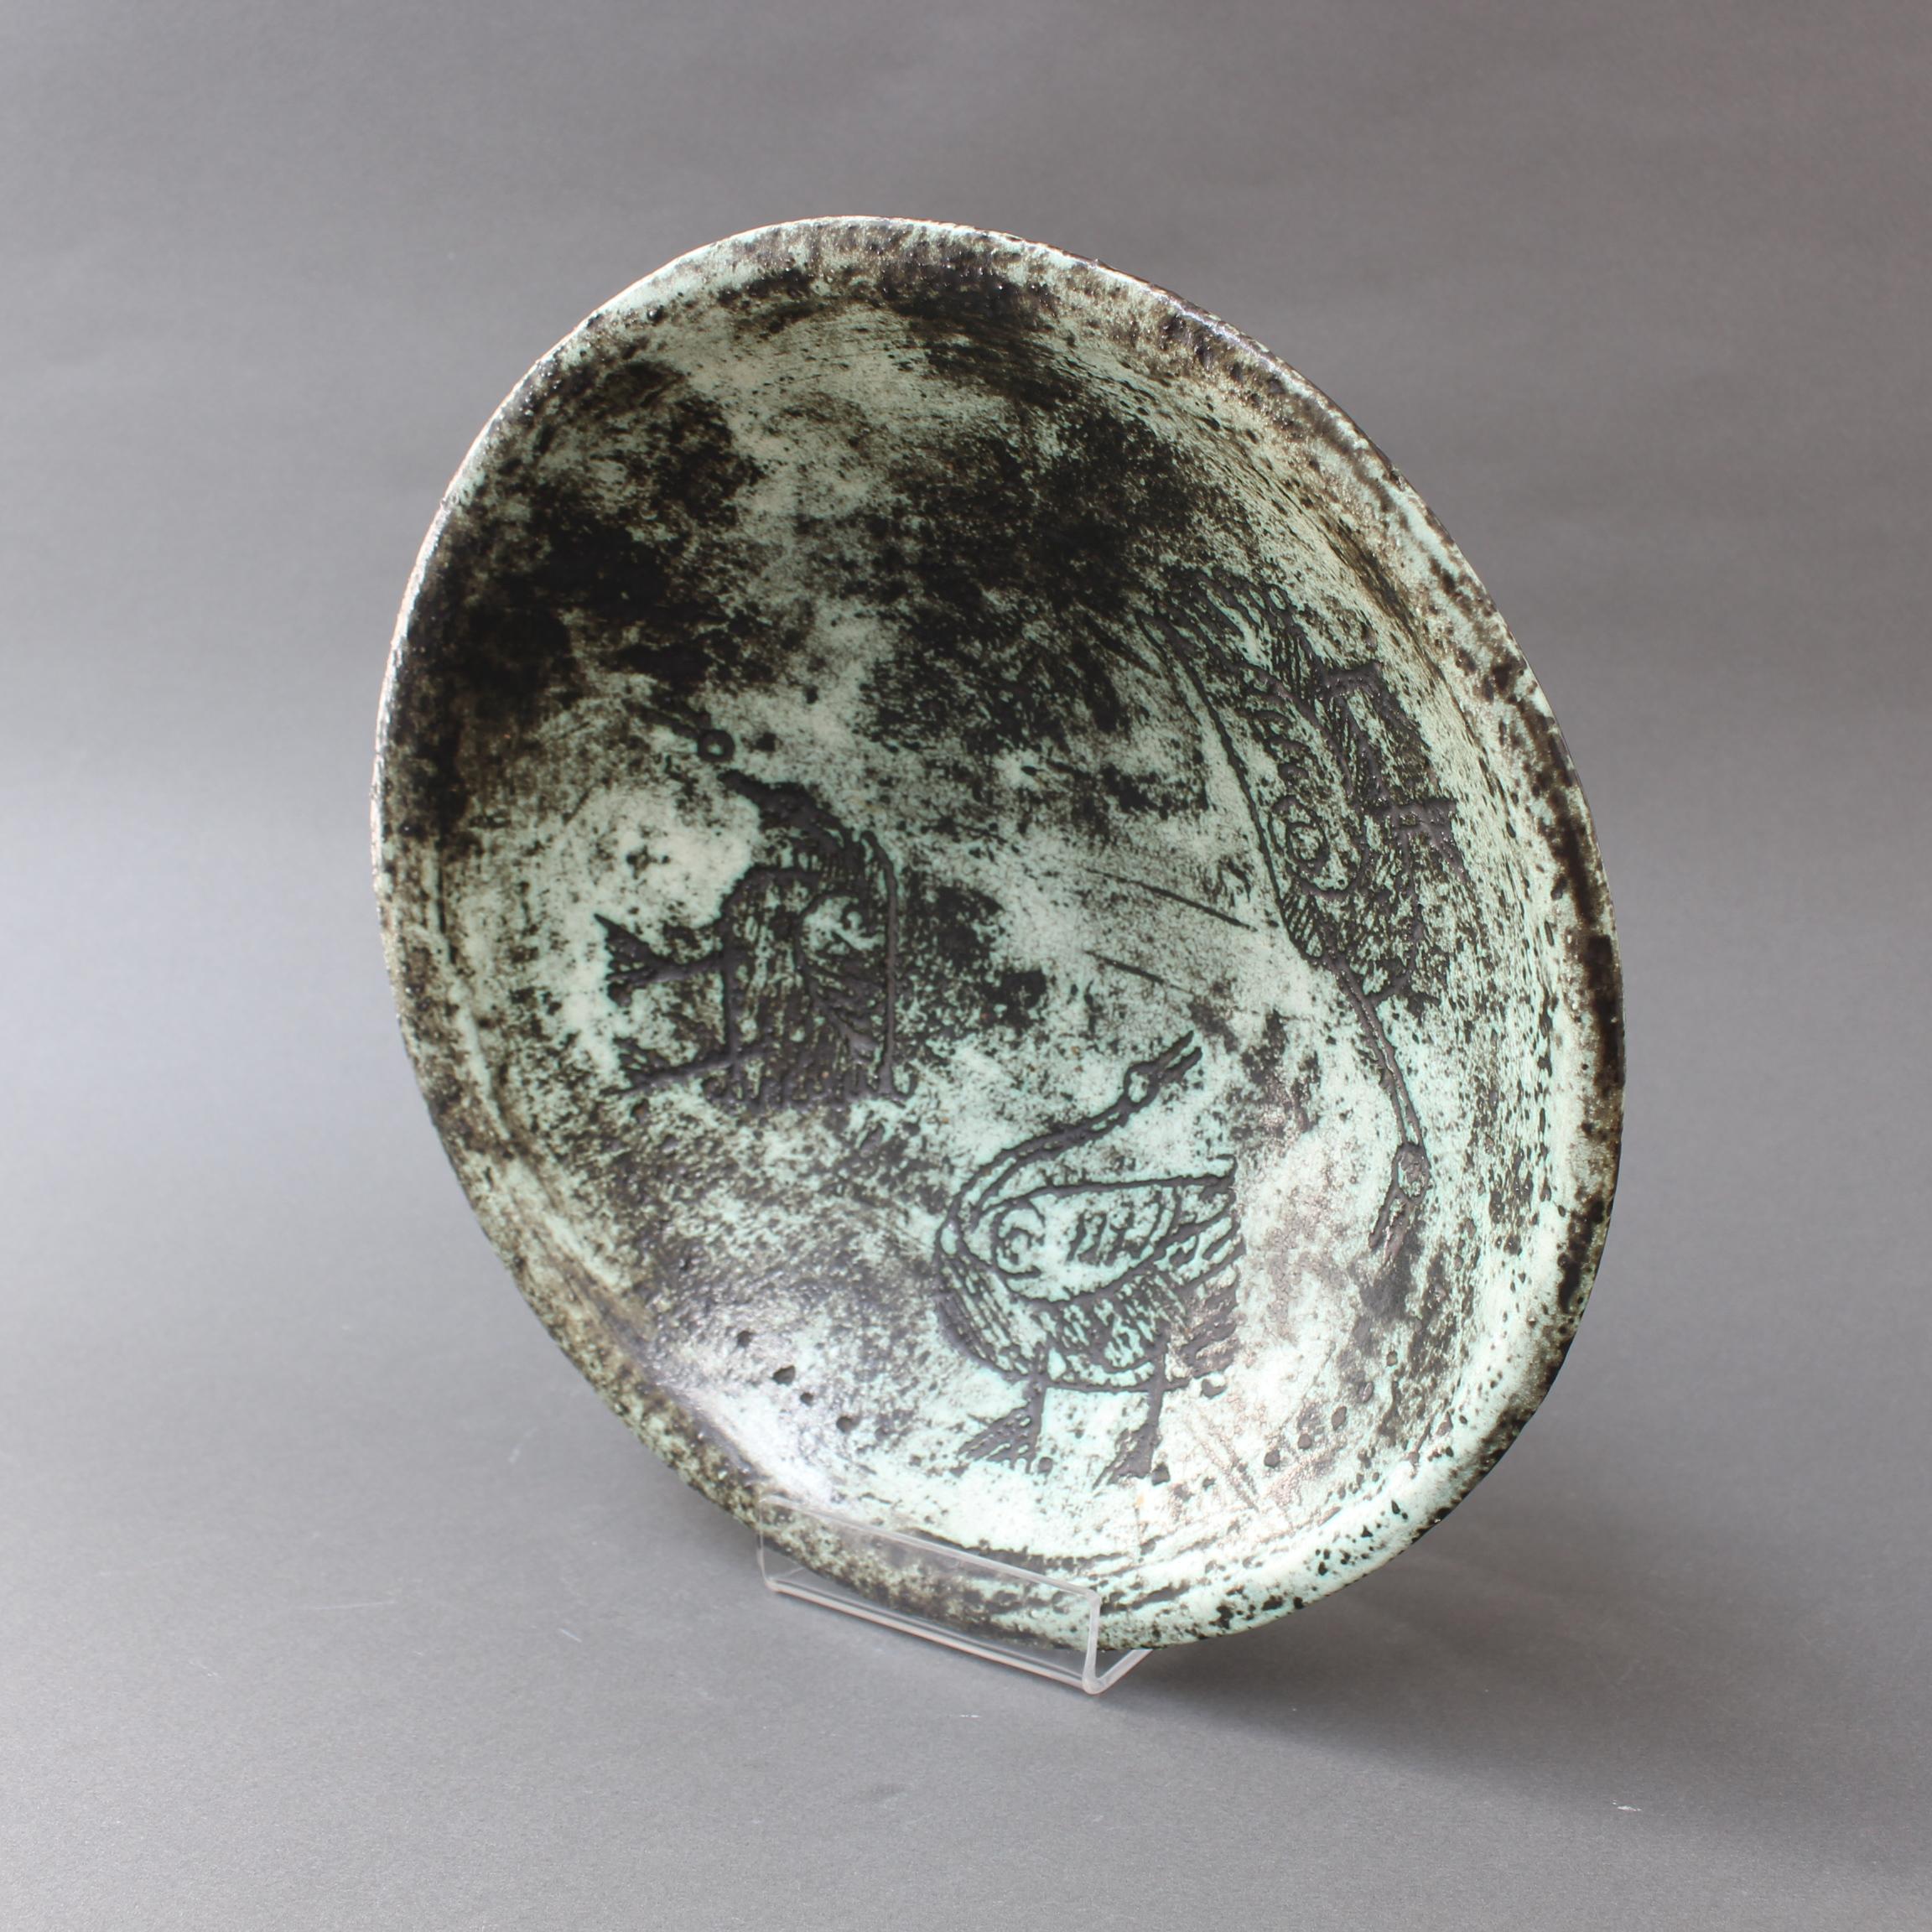 French Midcentury Ceramic Decorative Bowl by Jacques Blin, circa 1950s